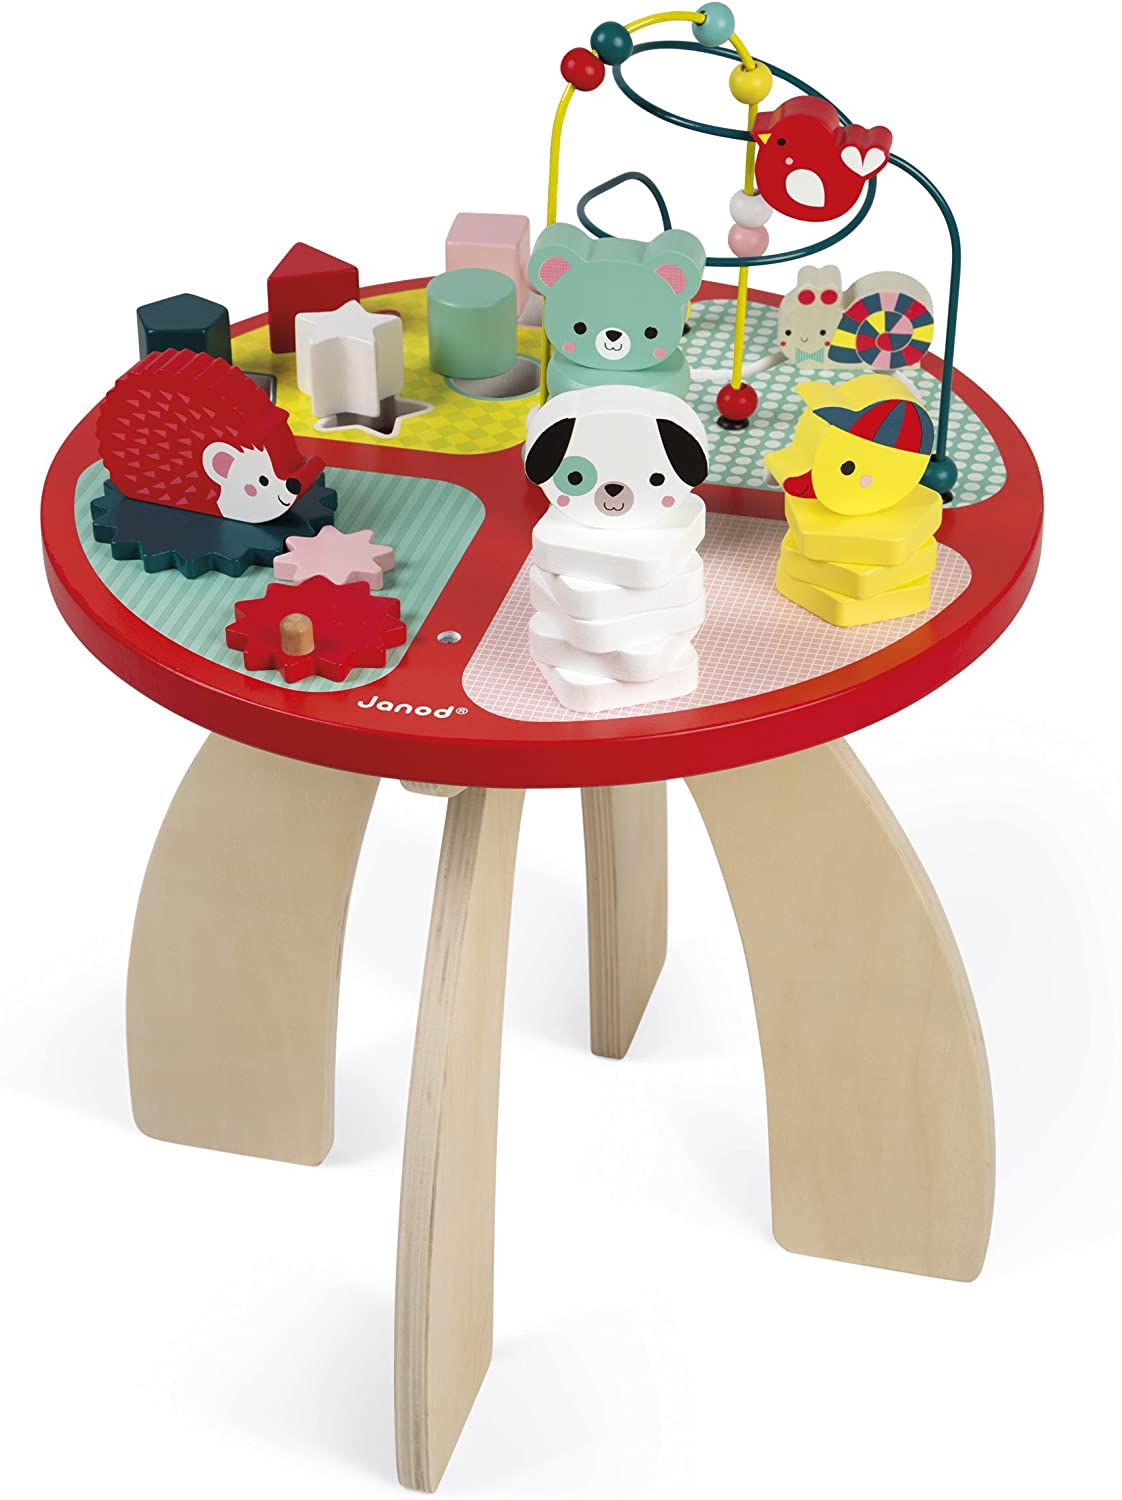 Janod J08018 Baby Forest Activity Table